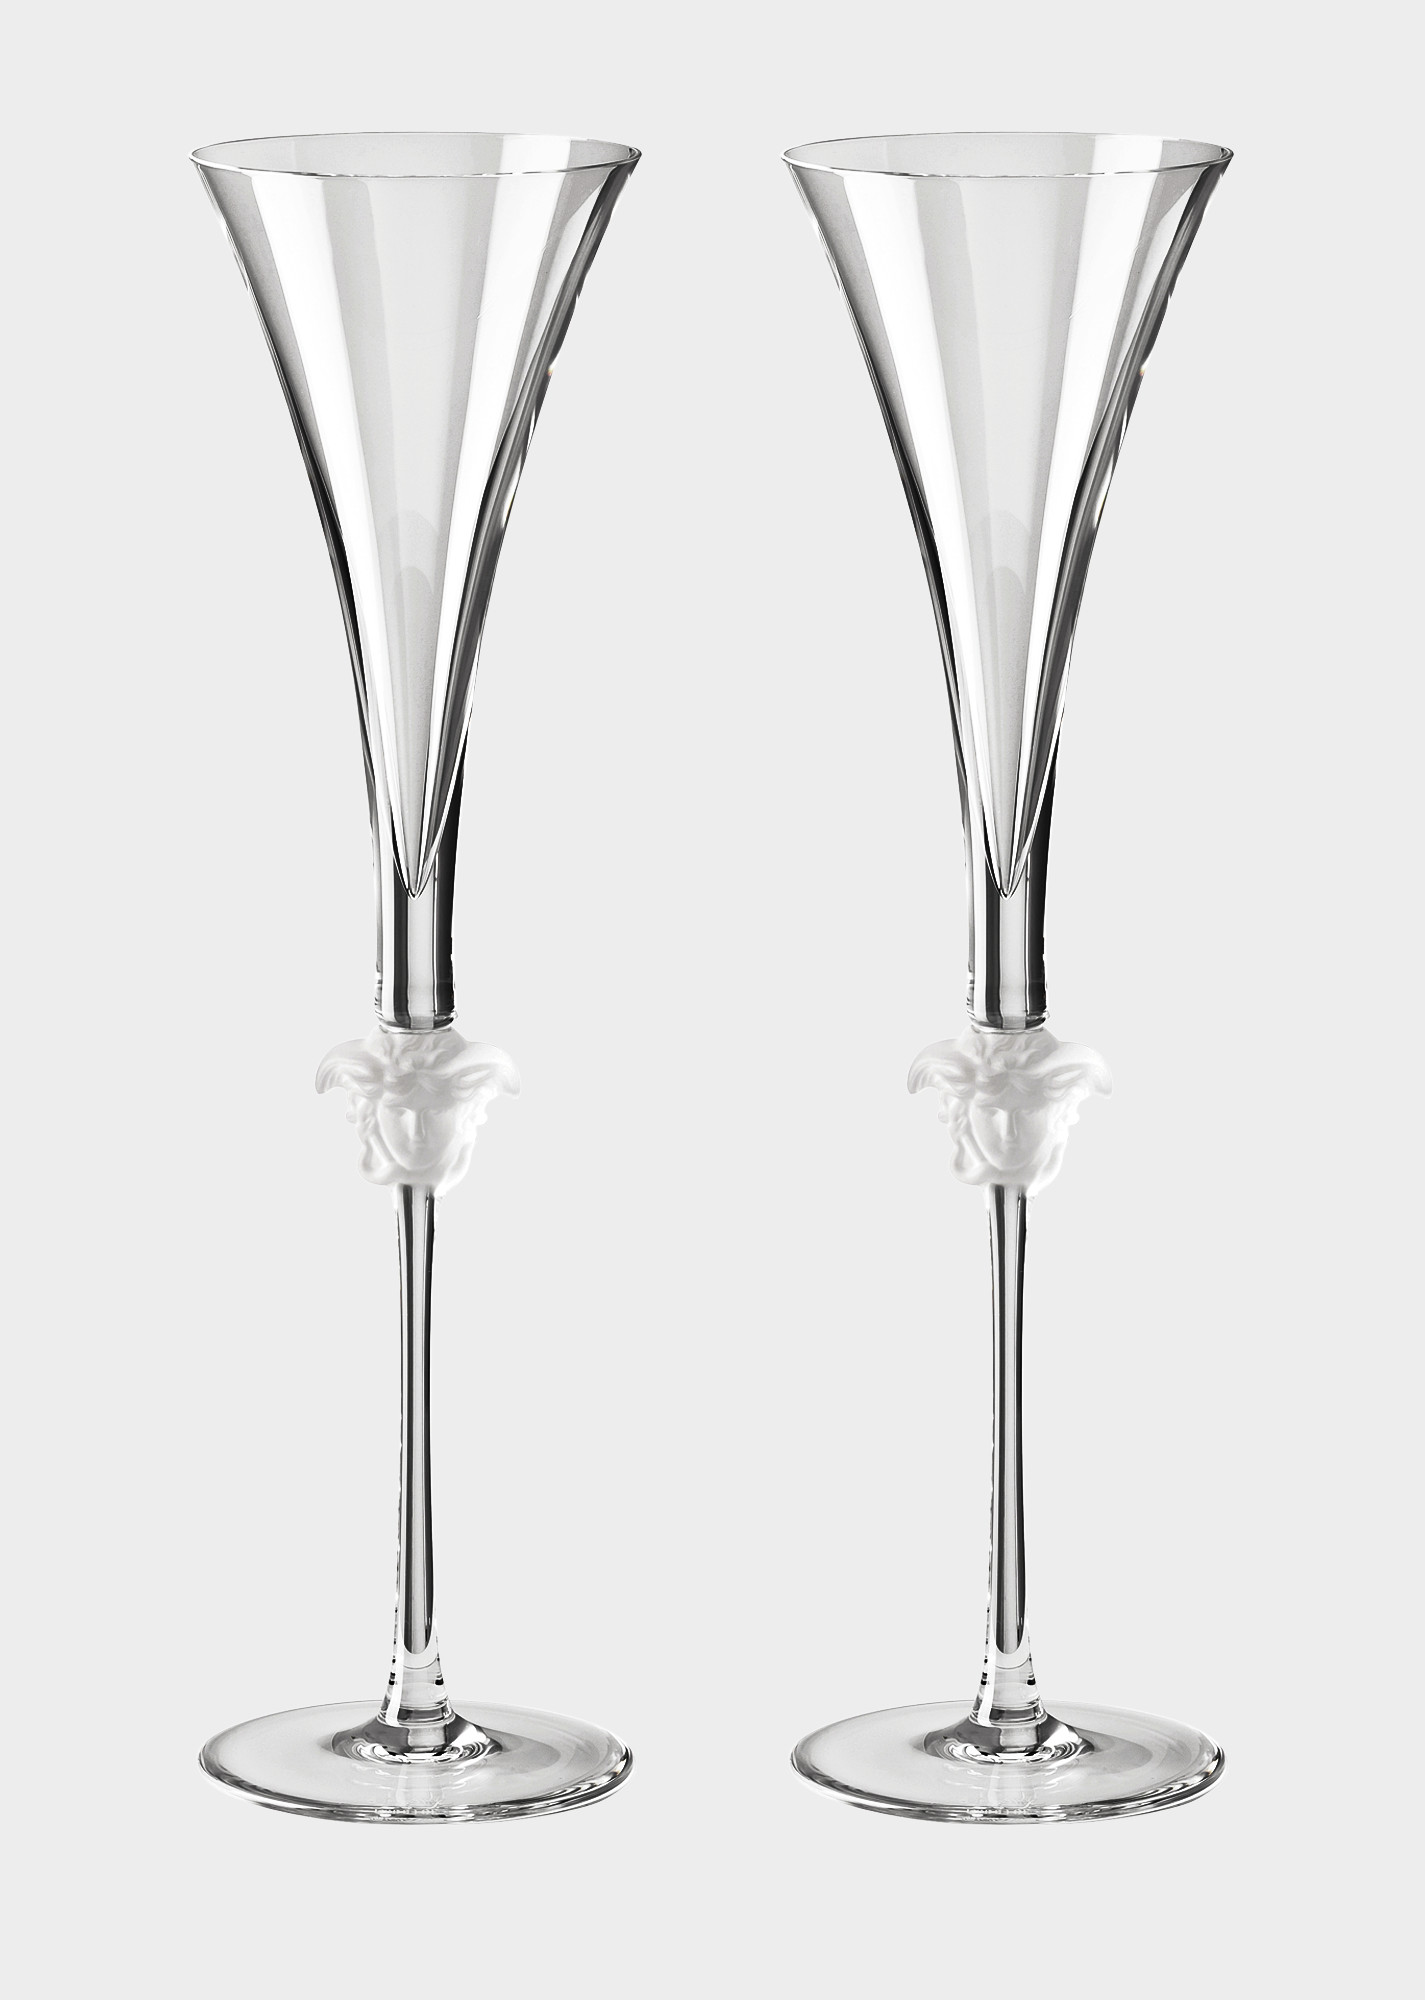 15 attractive Rosenthal Crystal Vase Germany 2024 free download rosenthal crystal vase germany of versace home luxury glass crystal official website intended for 90 n48804 n110835 n2066 20 medusalumieregb2champagneflute glassandcrystal versace online sto